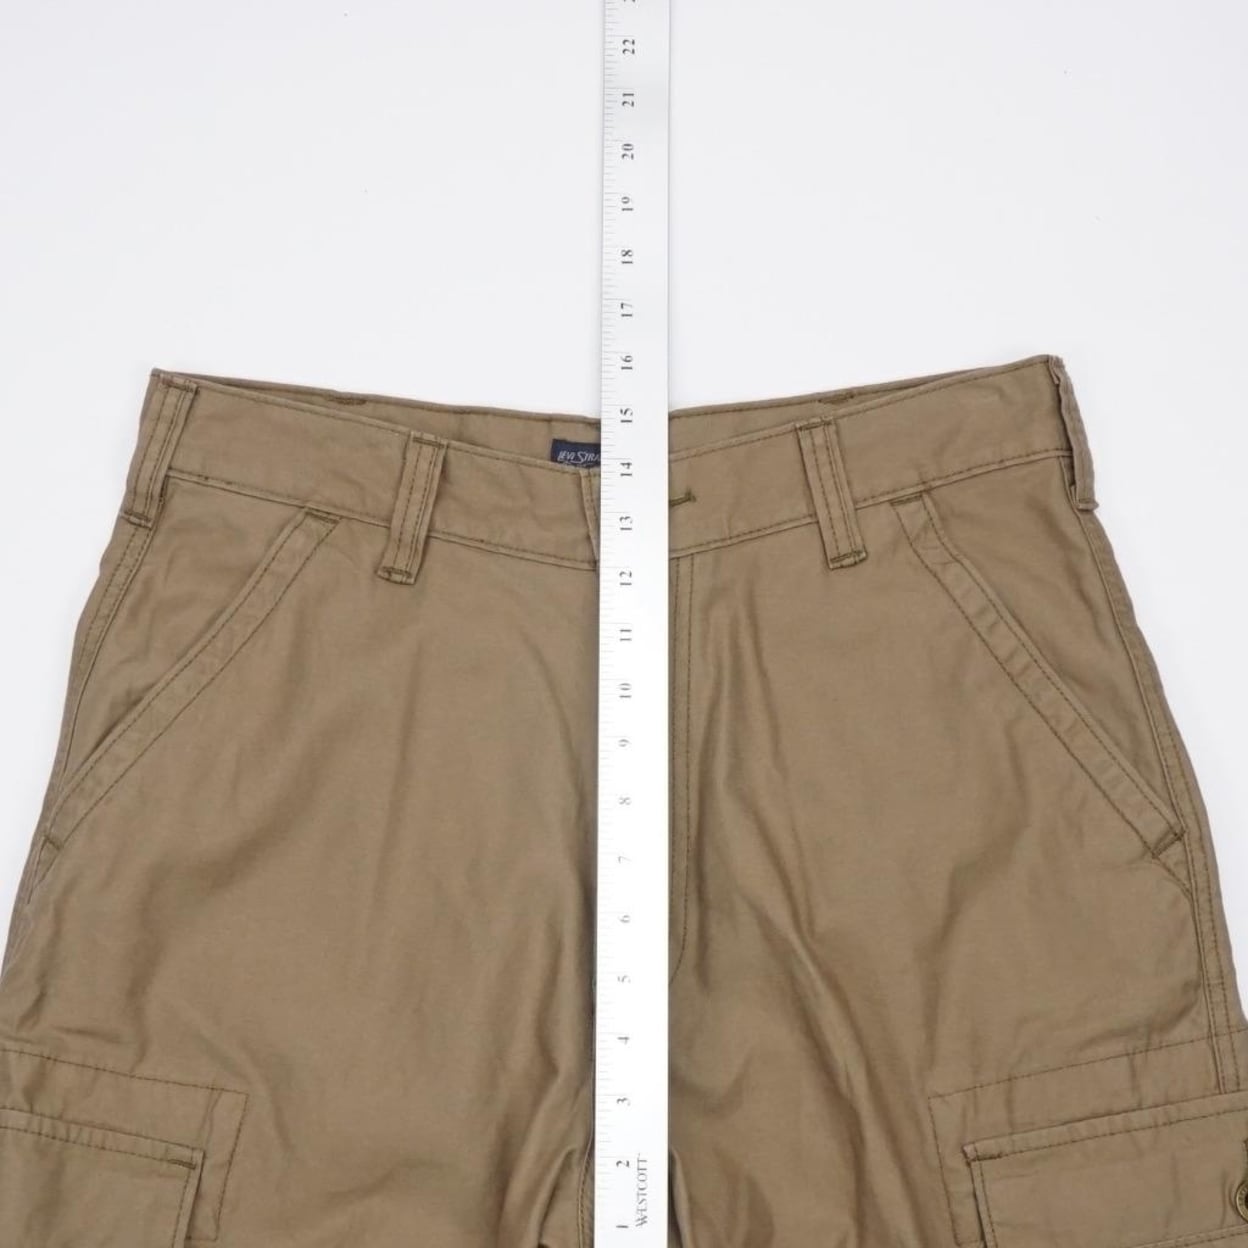 levi strauss two horse brand cargo pants